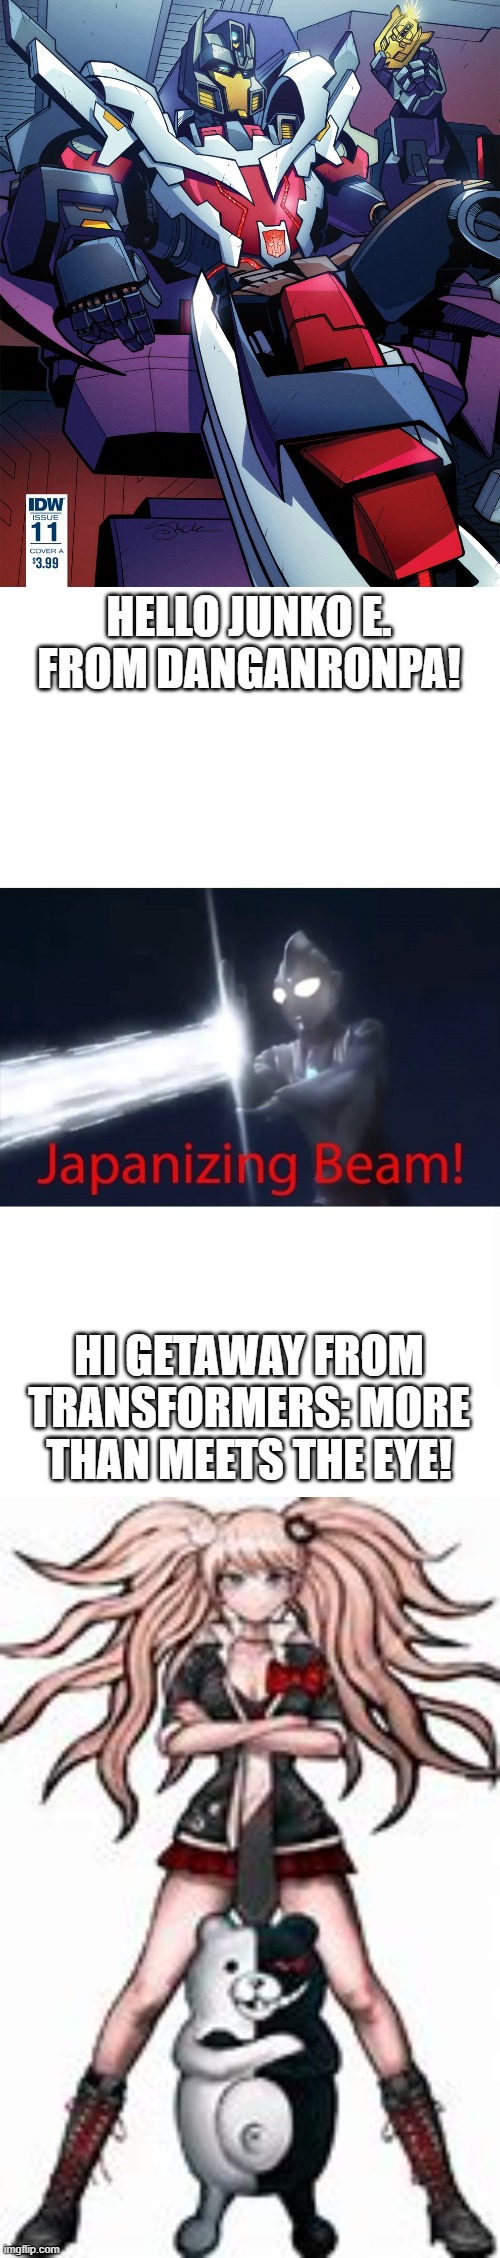 who can "getaway" better? | HELLO JUNKO E. FROM DANGANRONPA! HI GETAWAY FROM TRANSFORMERS: MORE THAN MEETS THE EYE! | image tagged in japanizing beam,danganronpa,transformers | made w/ Imgflip meme maker